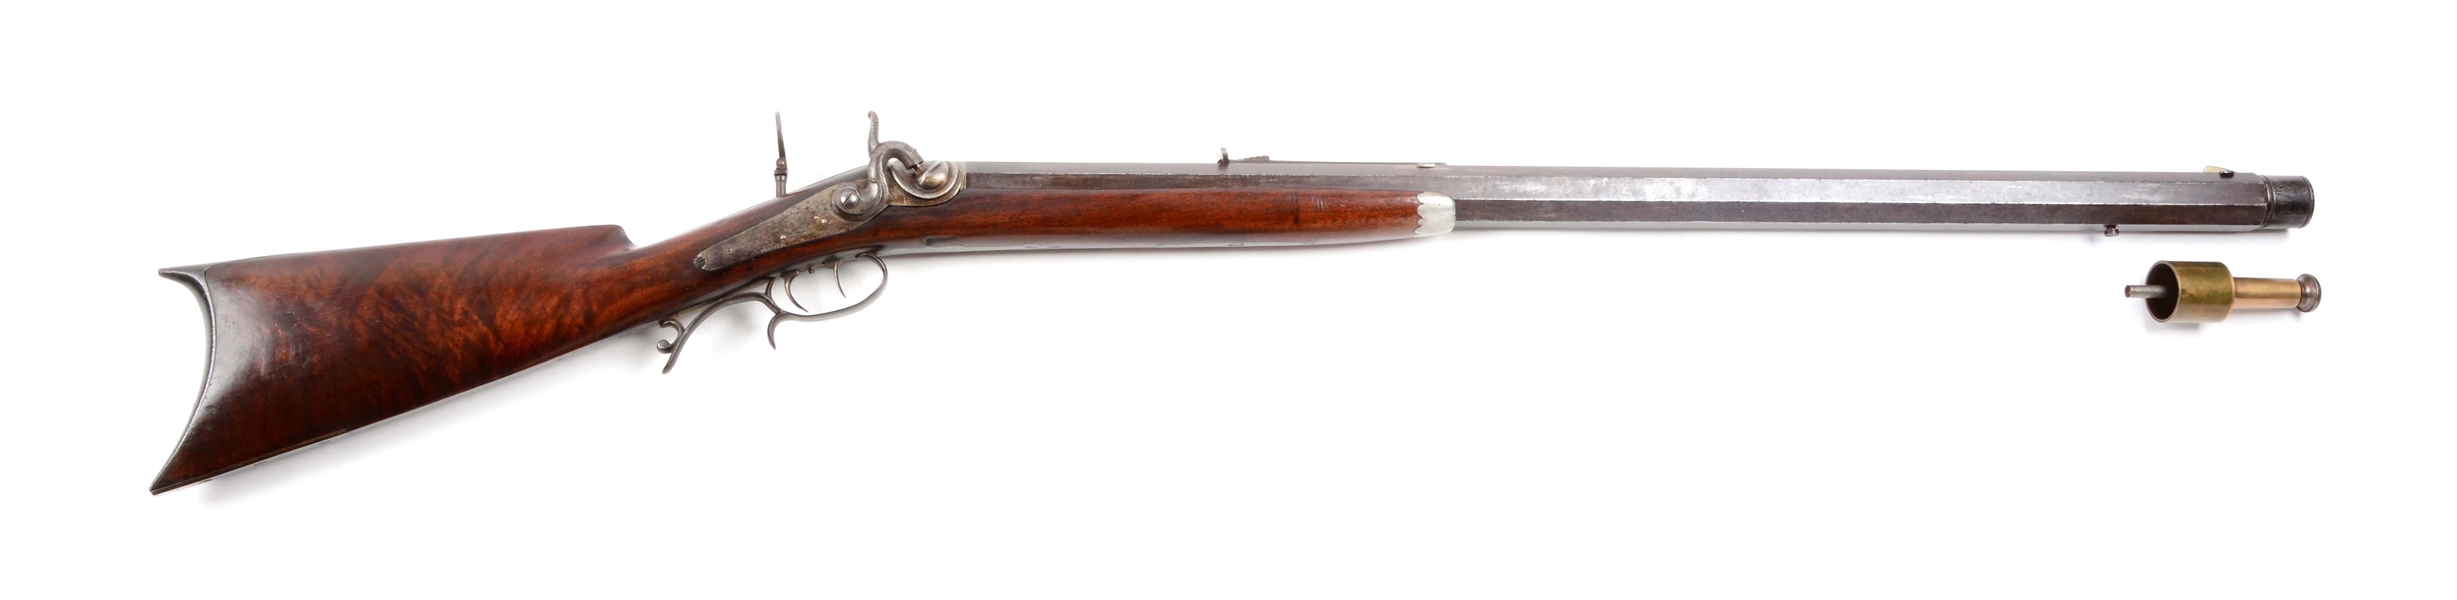 (A) CIRCA 1850S NELSON LEWIS CUSTOM HEAVY BARREL SINGLE SHOT PERCUSSION TARGET/SNIPER RIFLE WITH BULLET STARTER.